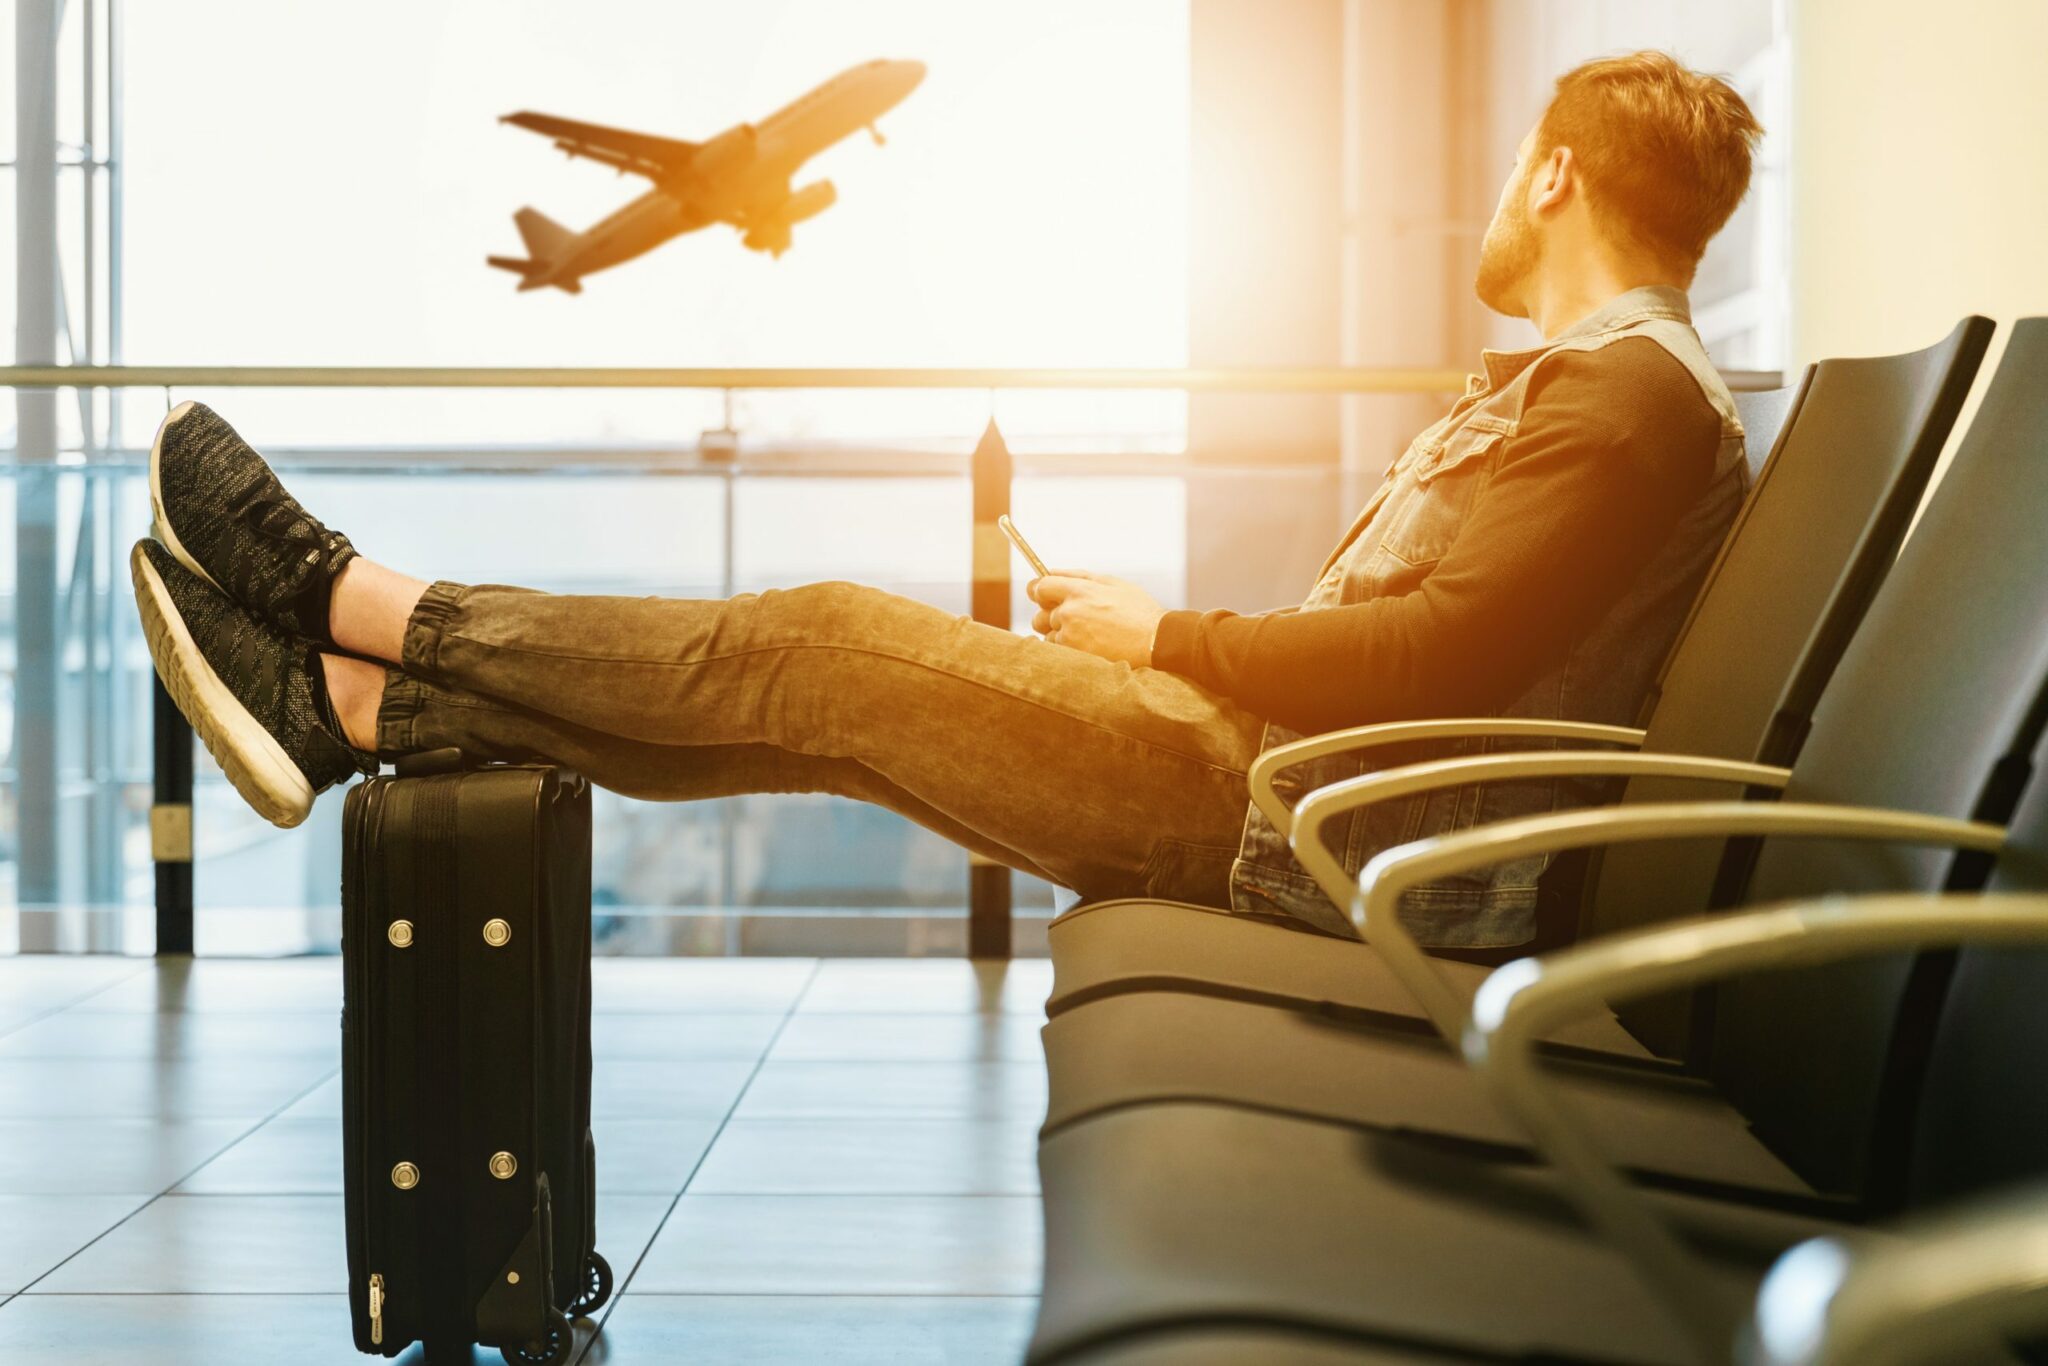 Flight Delays and Cancellations: Know Your Rights